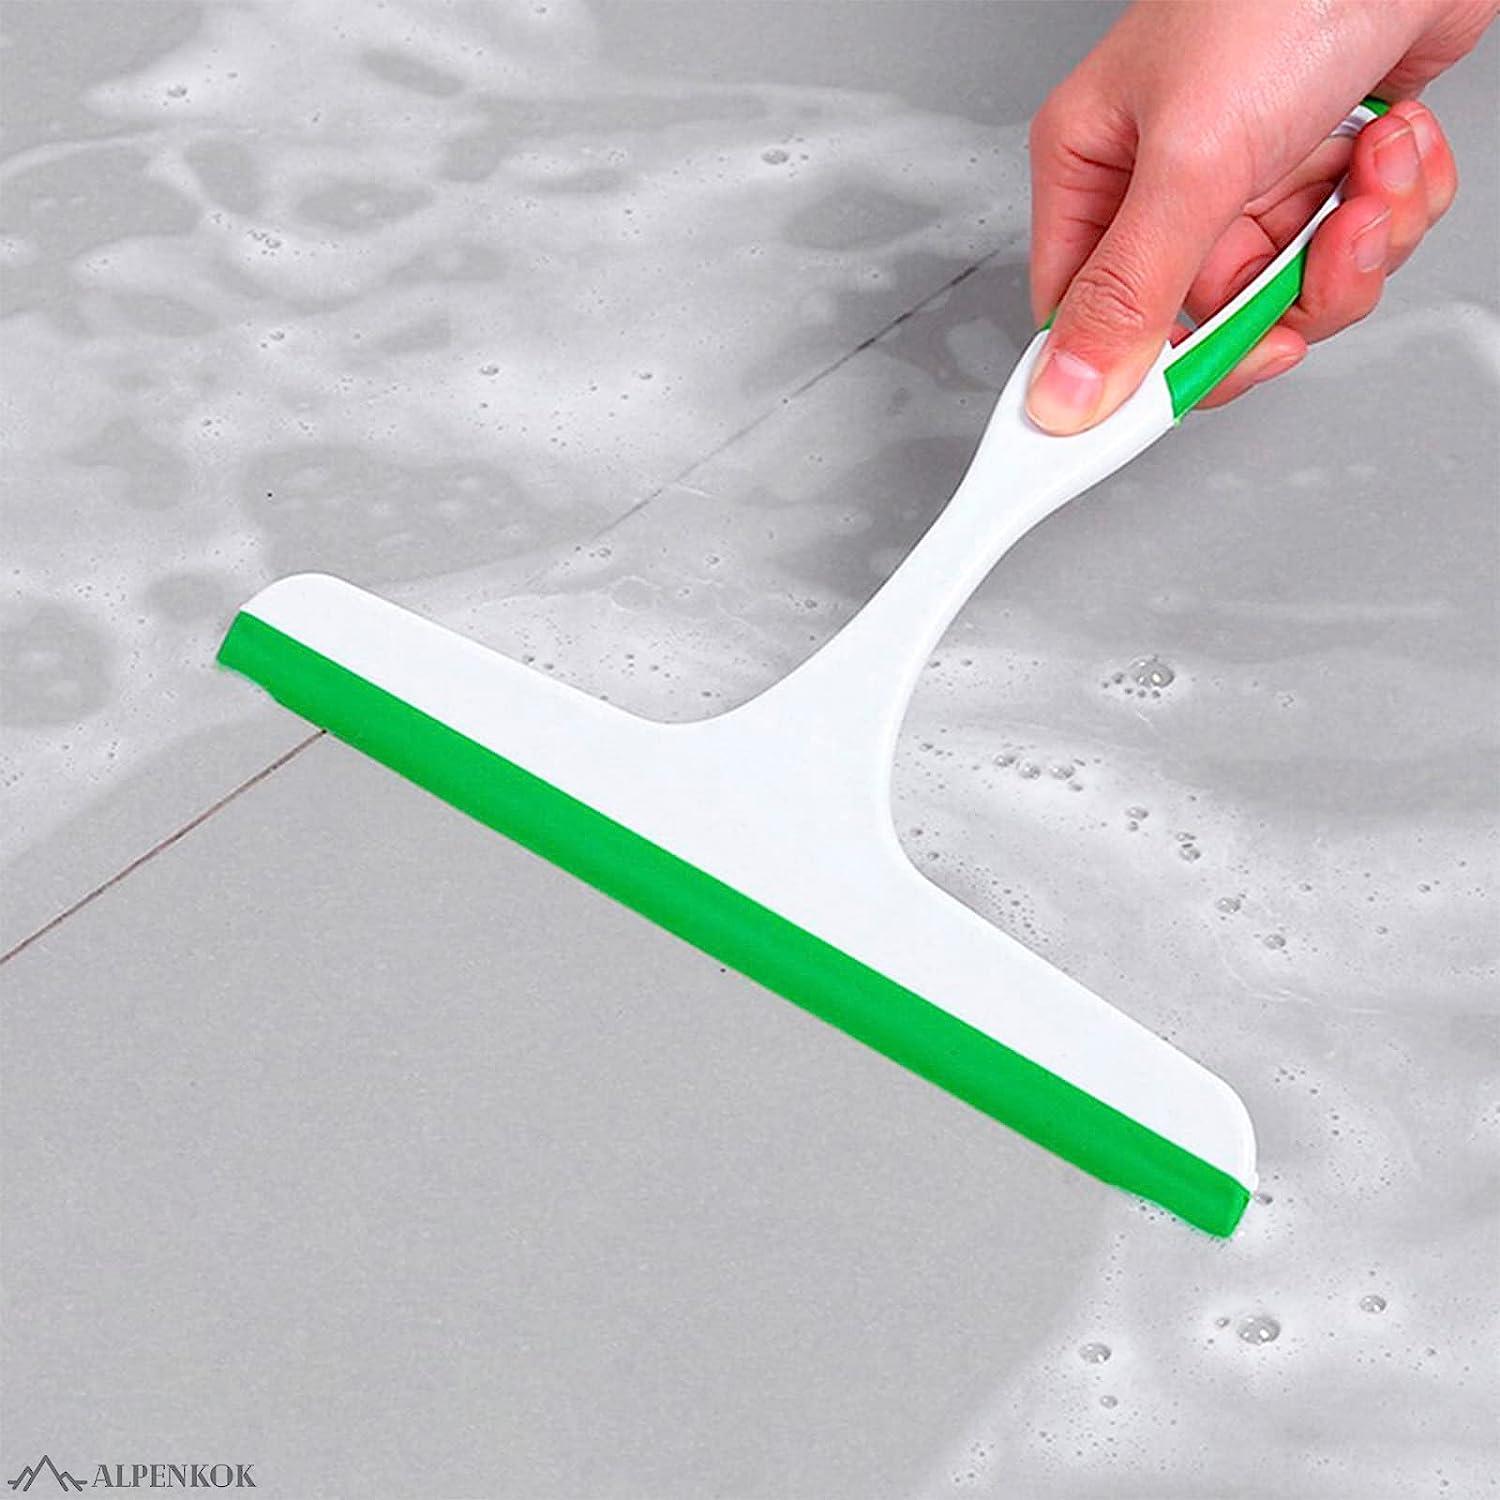 Window Cleaning Shower Glass Squeegee - 9.5Inch Small Squeegee for Shower  Glass Door for Car Windshield Cleaner Tool Shower Door Window Cleaner -  Mirror Cleaner Shower Squeegee for Tile with Good Grip